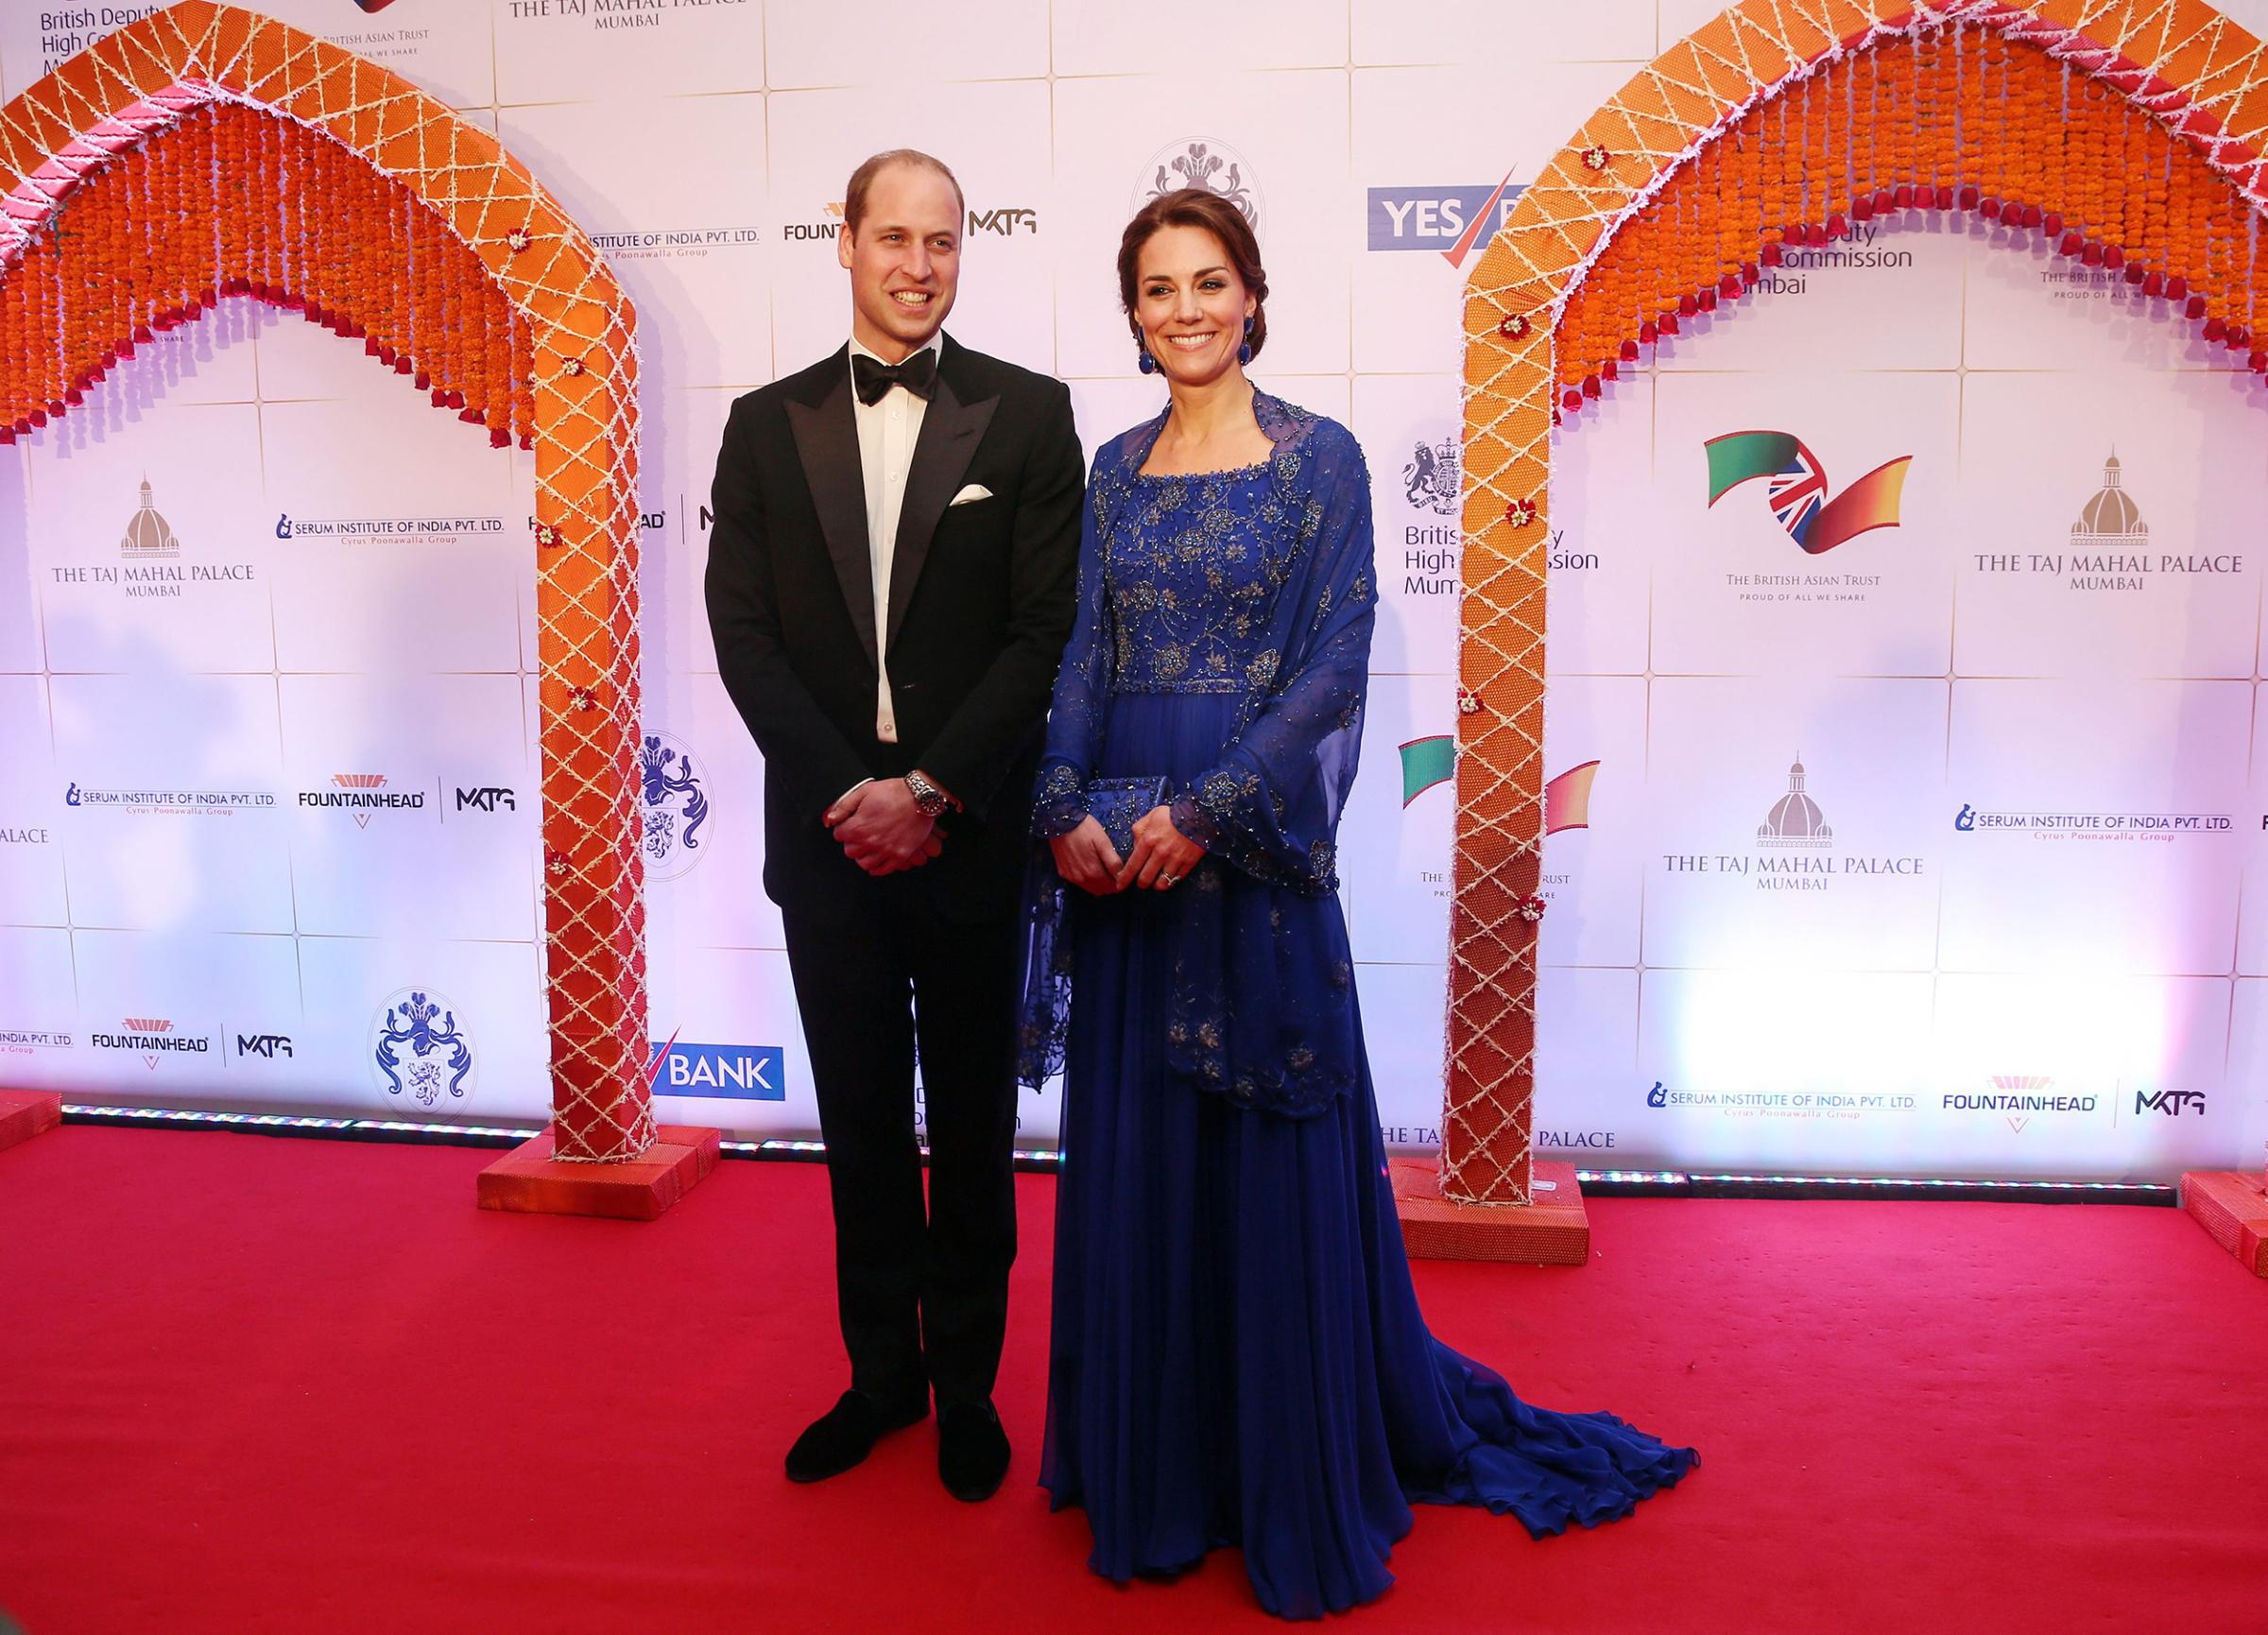 Prince William and Catherine, Duchess of Cambridge at the Charity Gala function at the Taj Mahal Palace hotel in Mumbai, India on April 10, 2016.